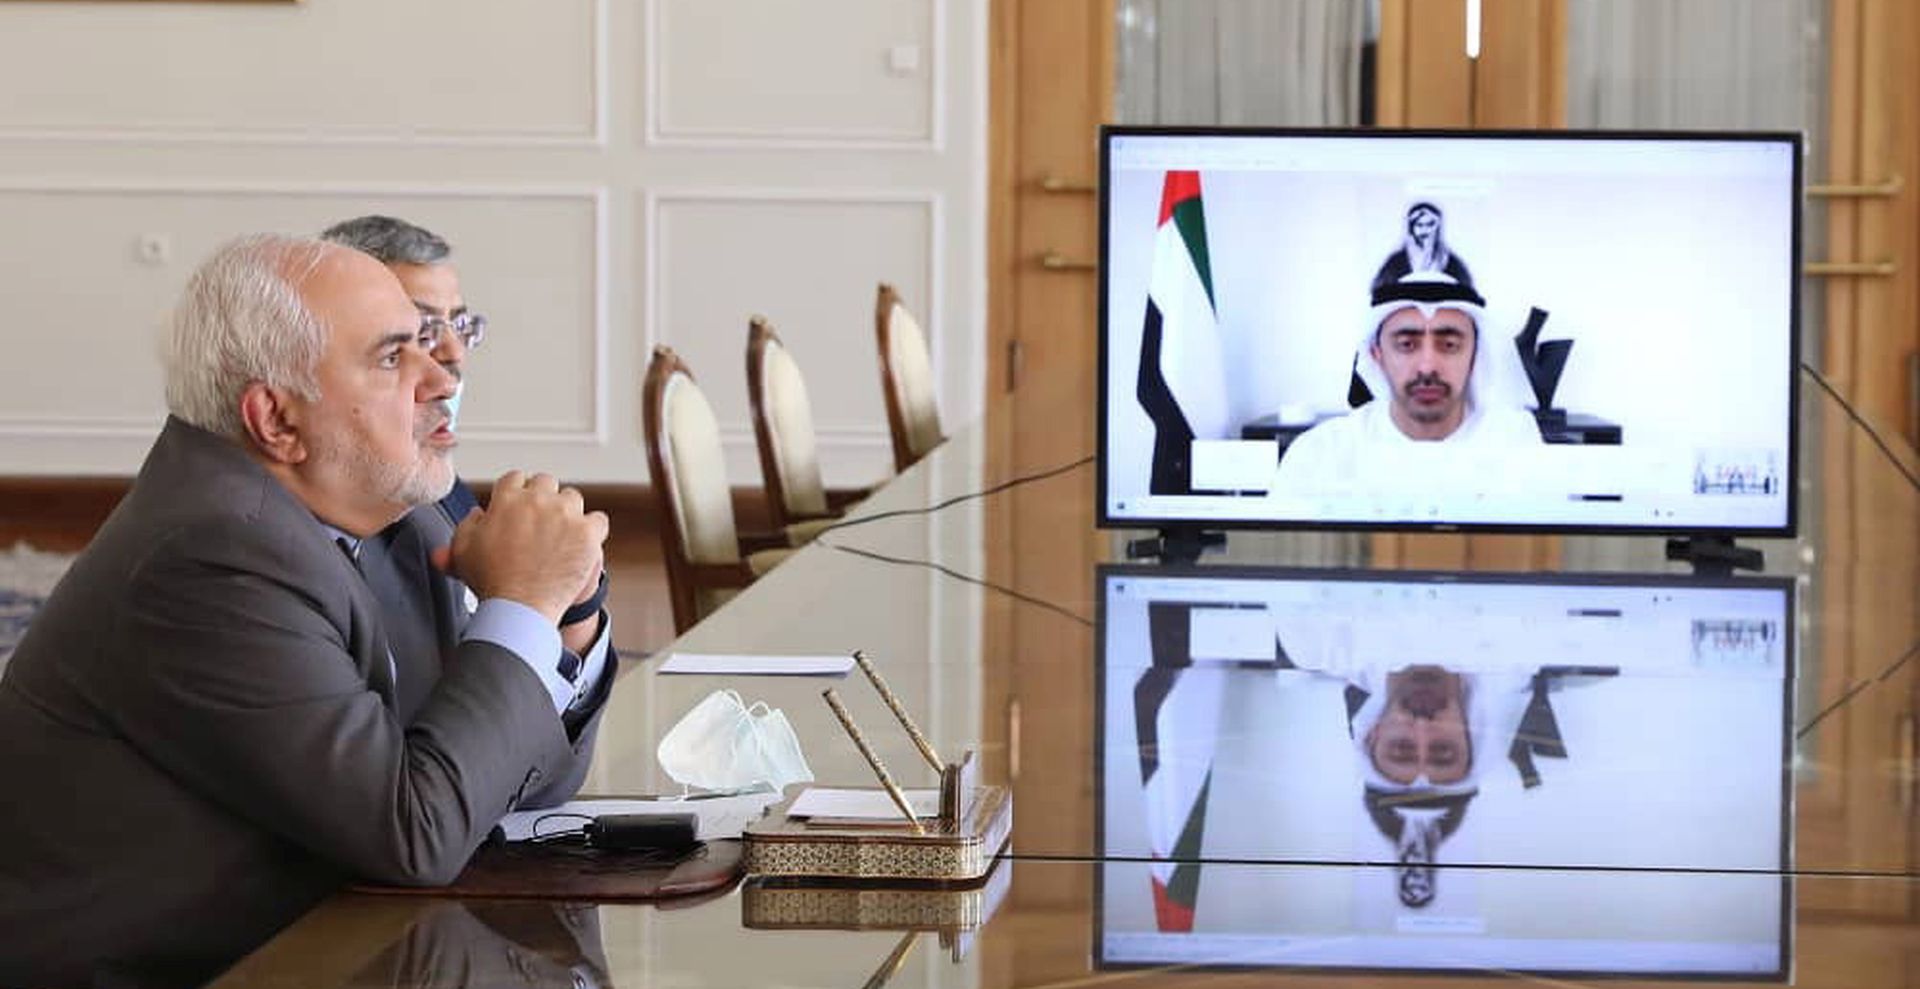 epa08580873 A handout picture made available by the Iranian foreign ministry office shows Iranian foreign minister Mohammad Javad Zarif talks to his UAE counterpart Sheikh Abdullah bin Zayed Al Nahyan (R-on the screen) during a video meeting from Tehran, Iran, 02 August 2020.  EPA/IRAN FOREIGN MINISTRY OFFICE /HANDOUT  HANDOUT EDITORIAL USE ONLY/NO SALES